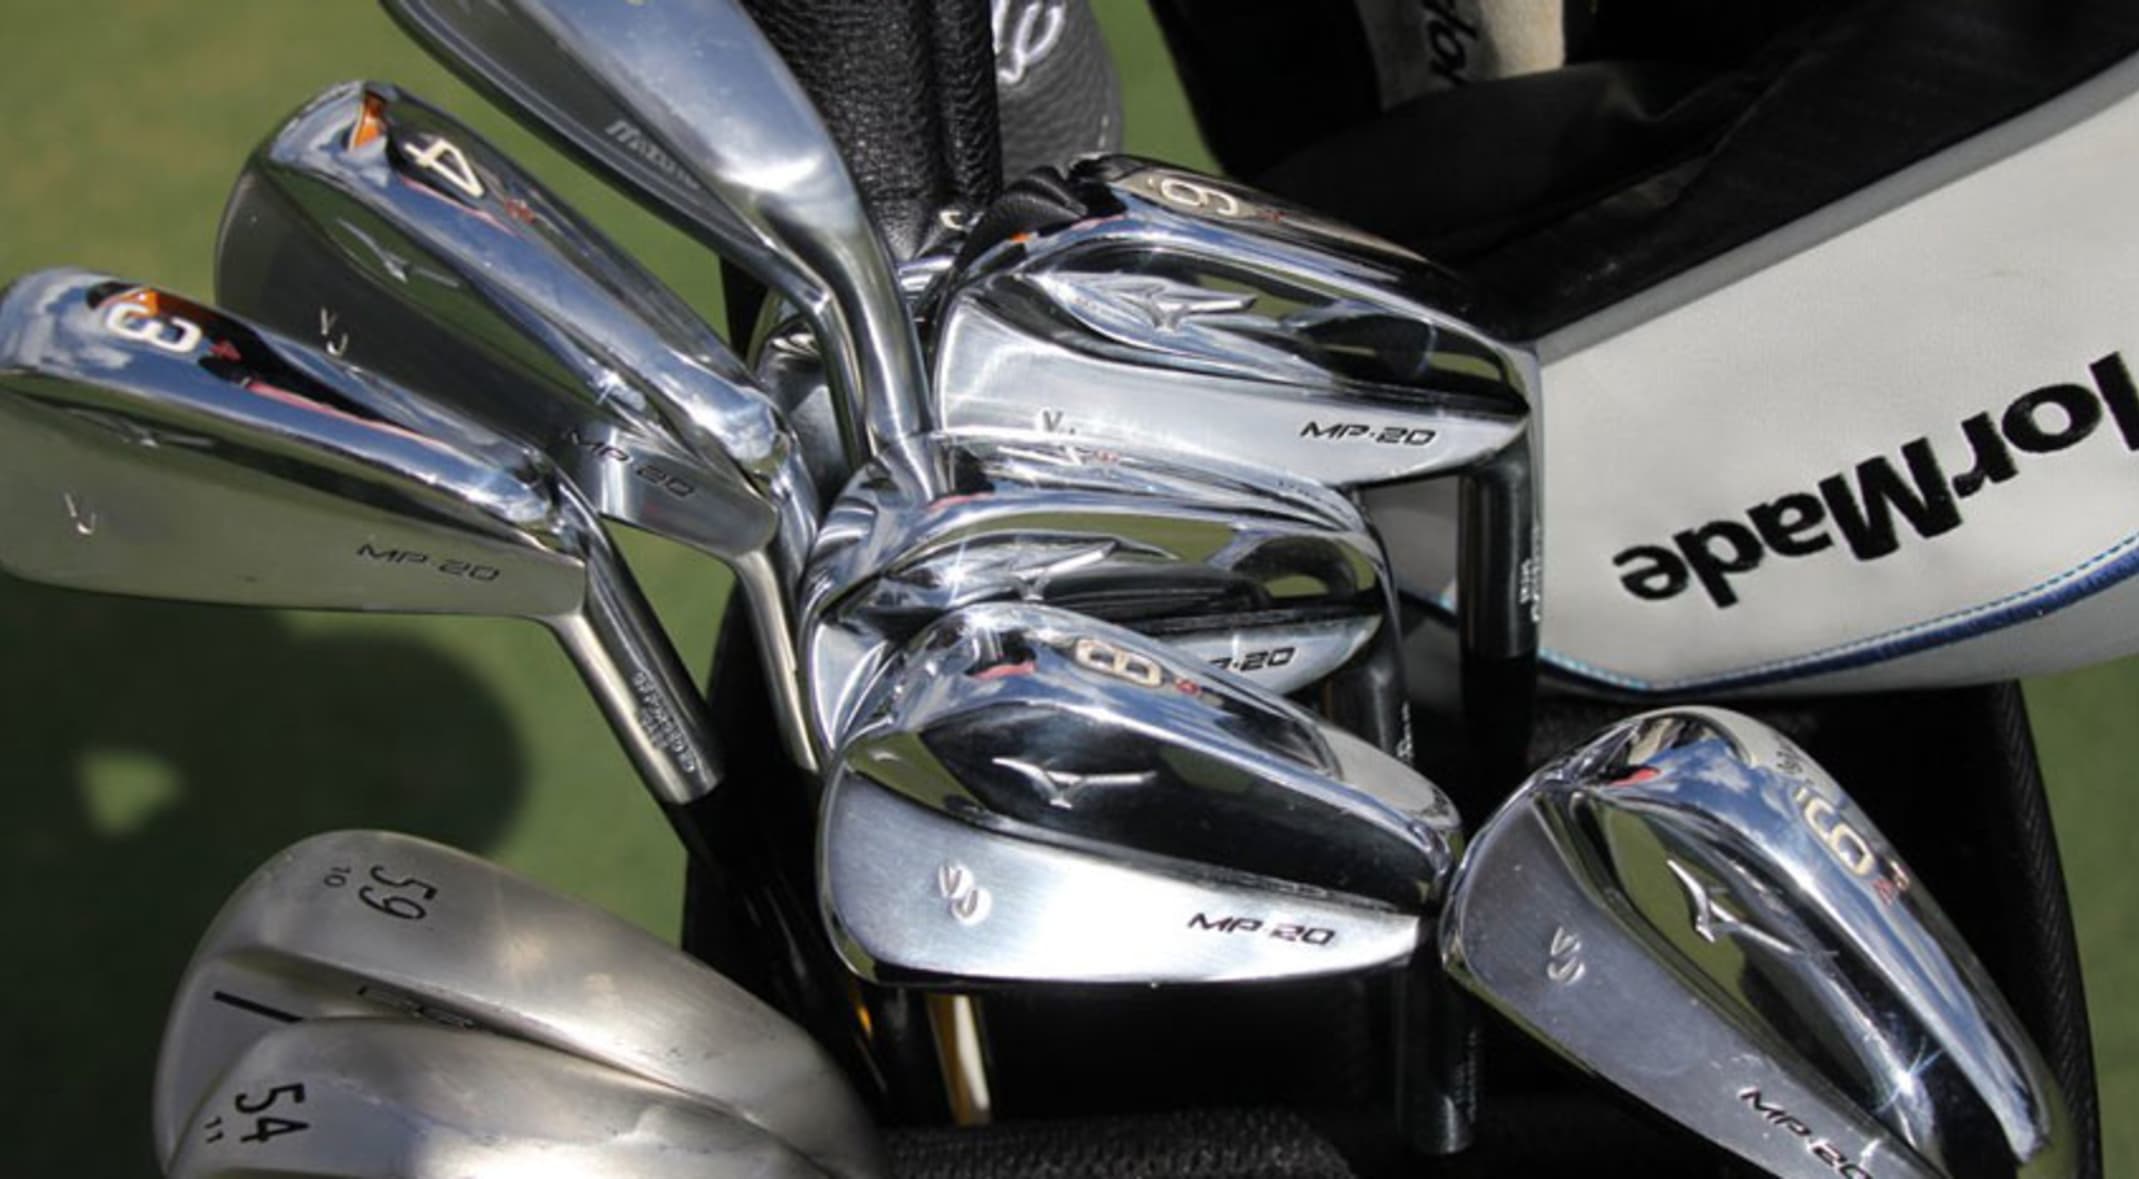 best mizuno irons all time